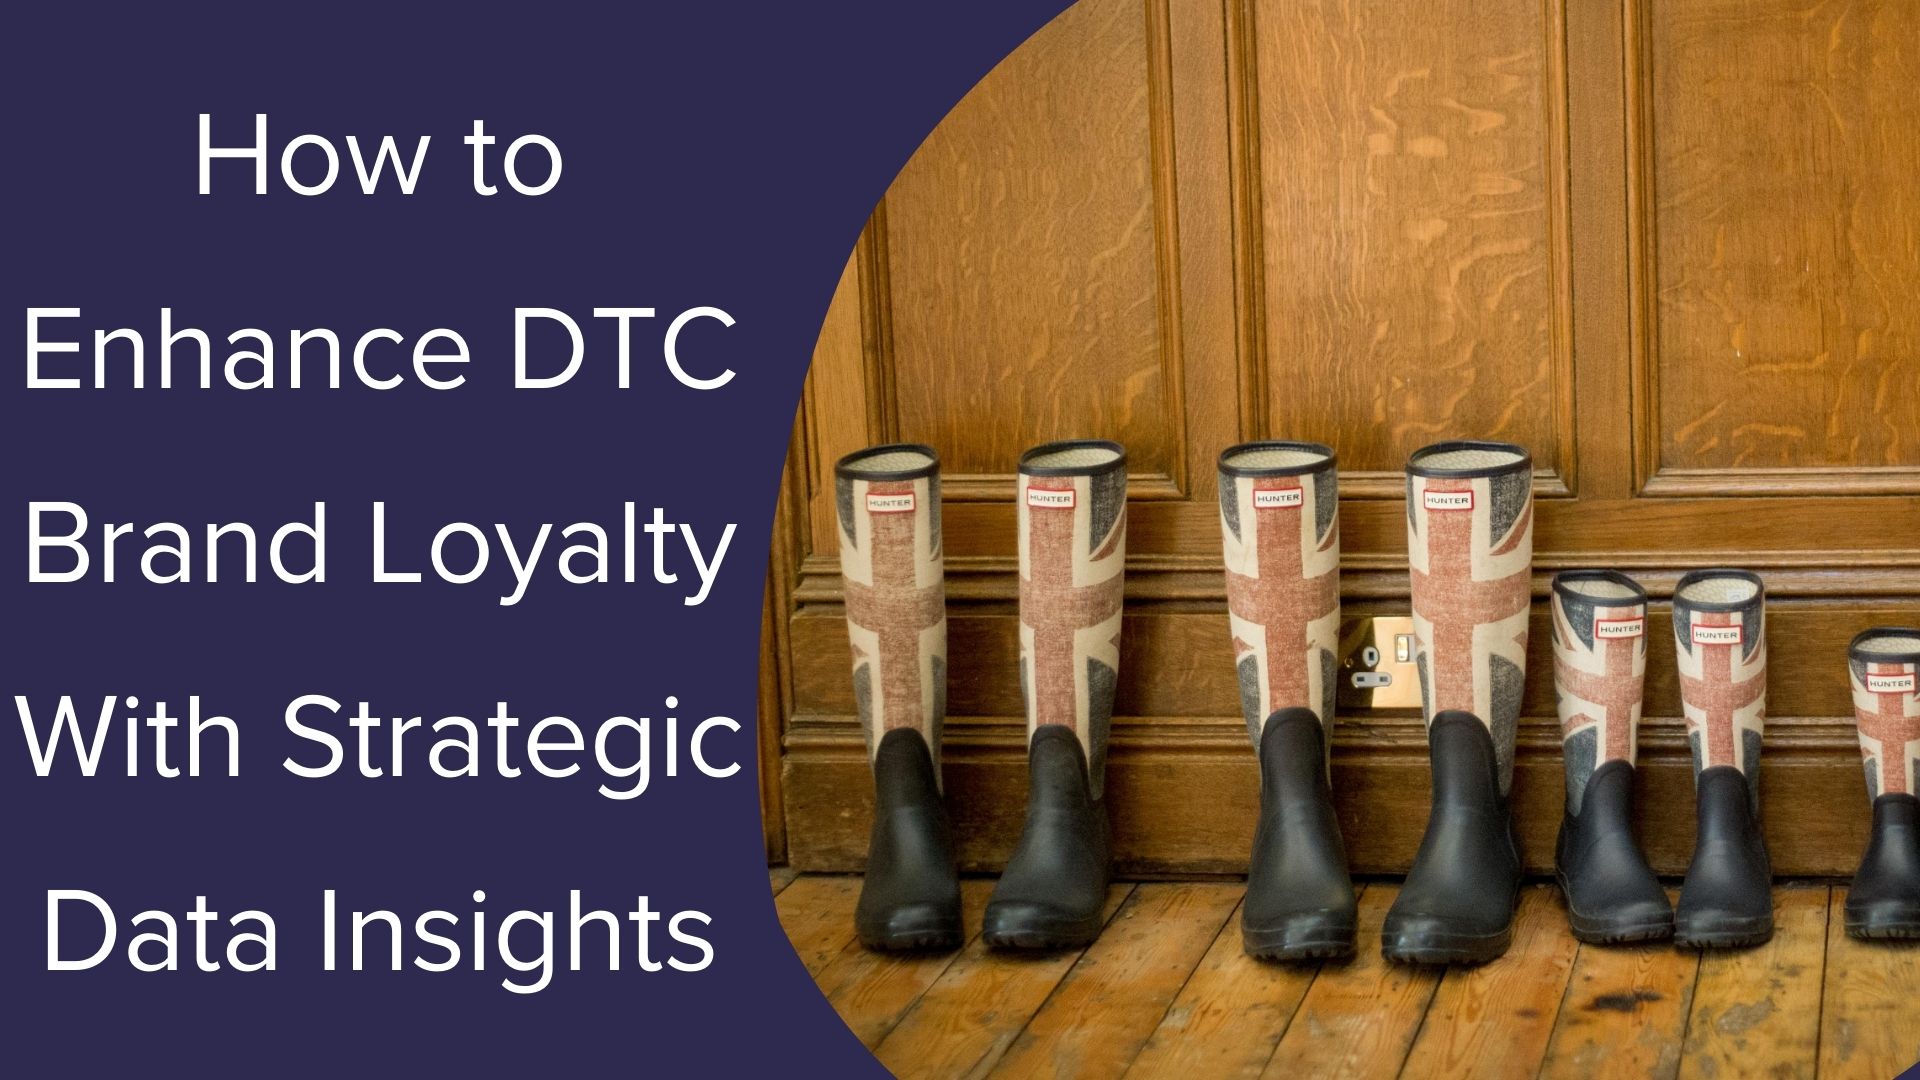 How to Enhance DTC Brand Loyalty With Strategic Data Insights